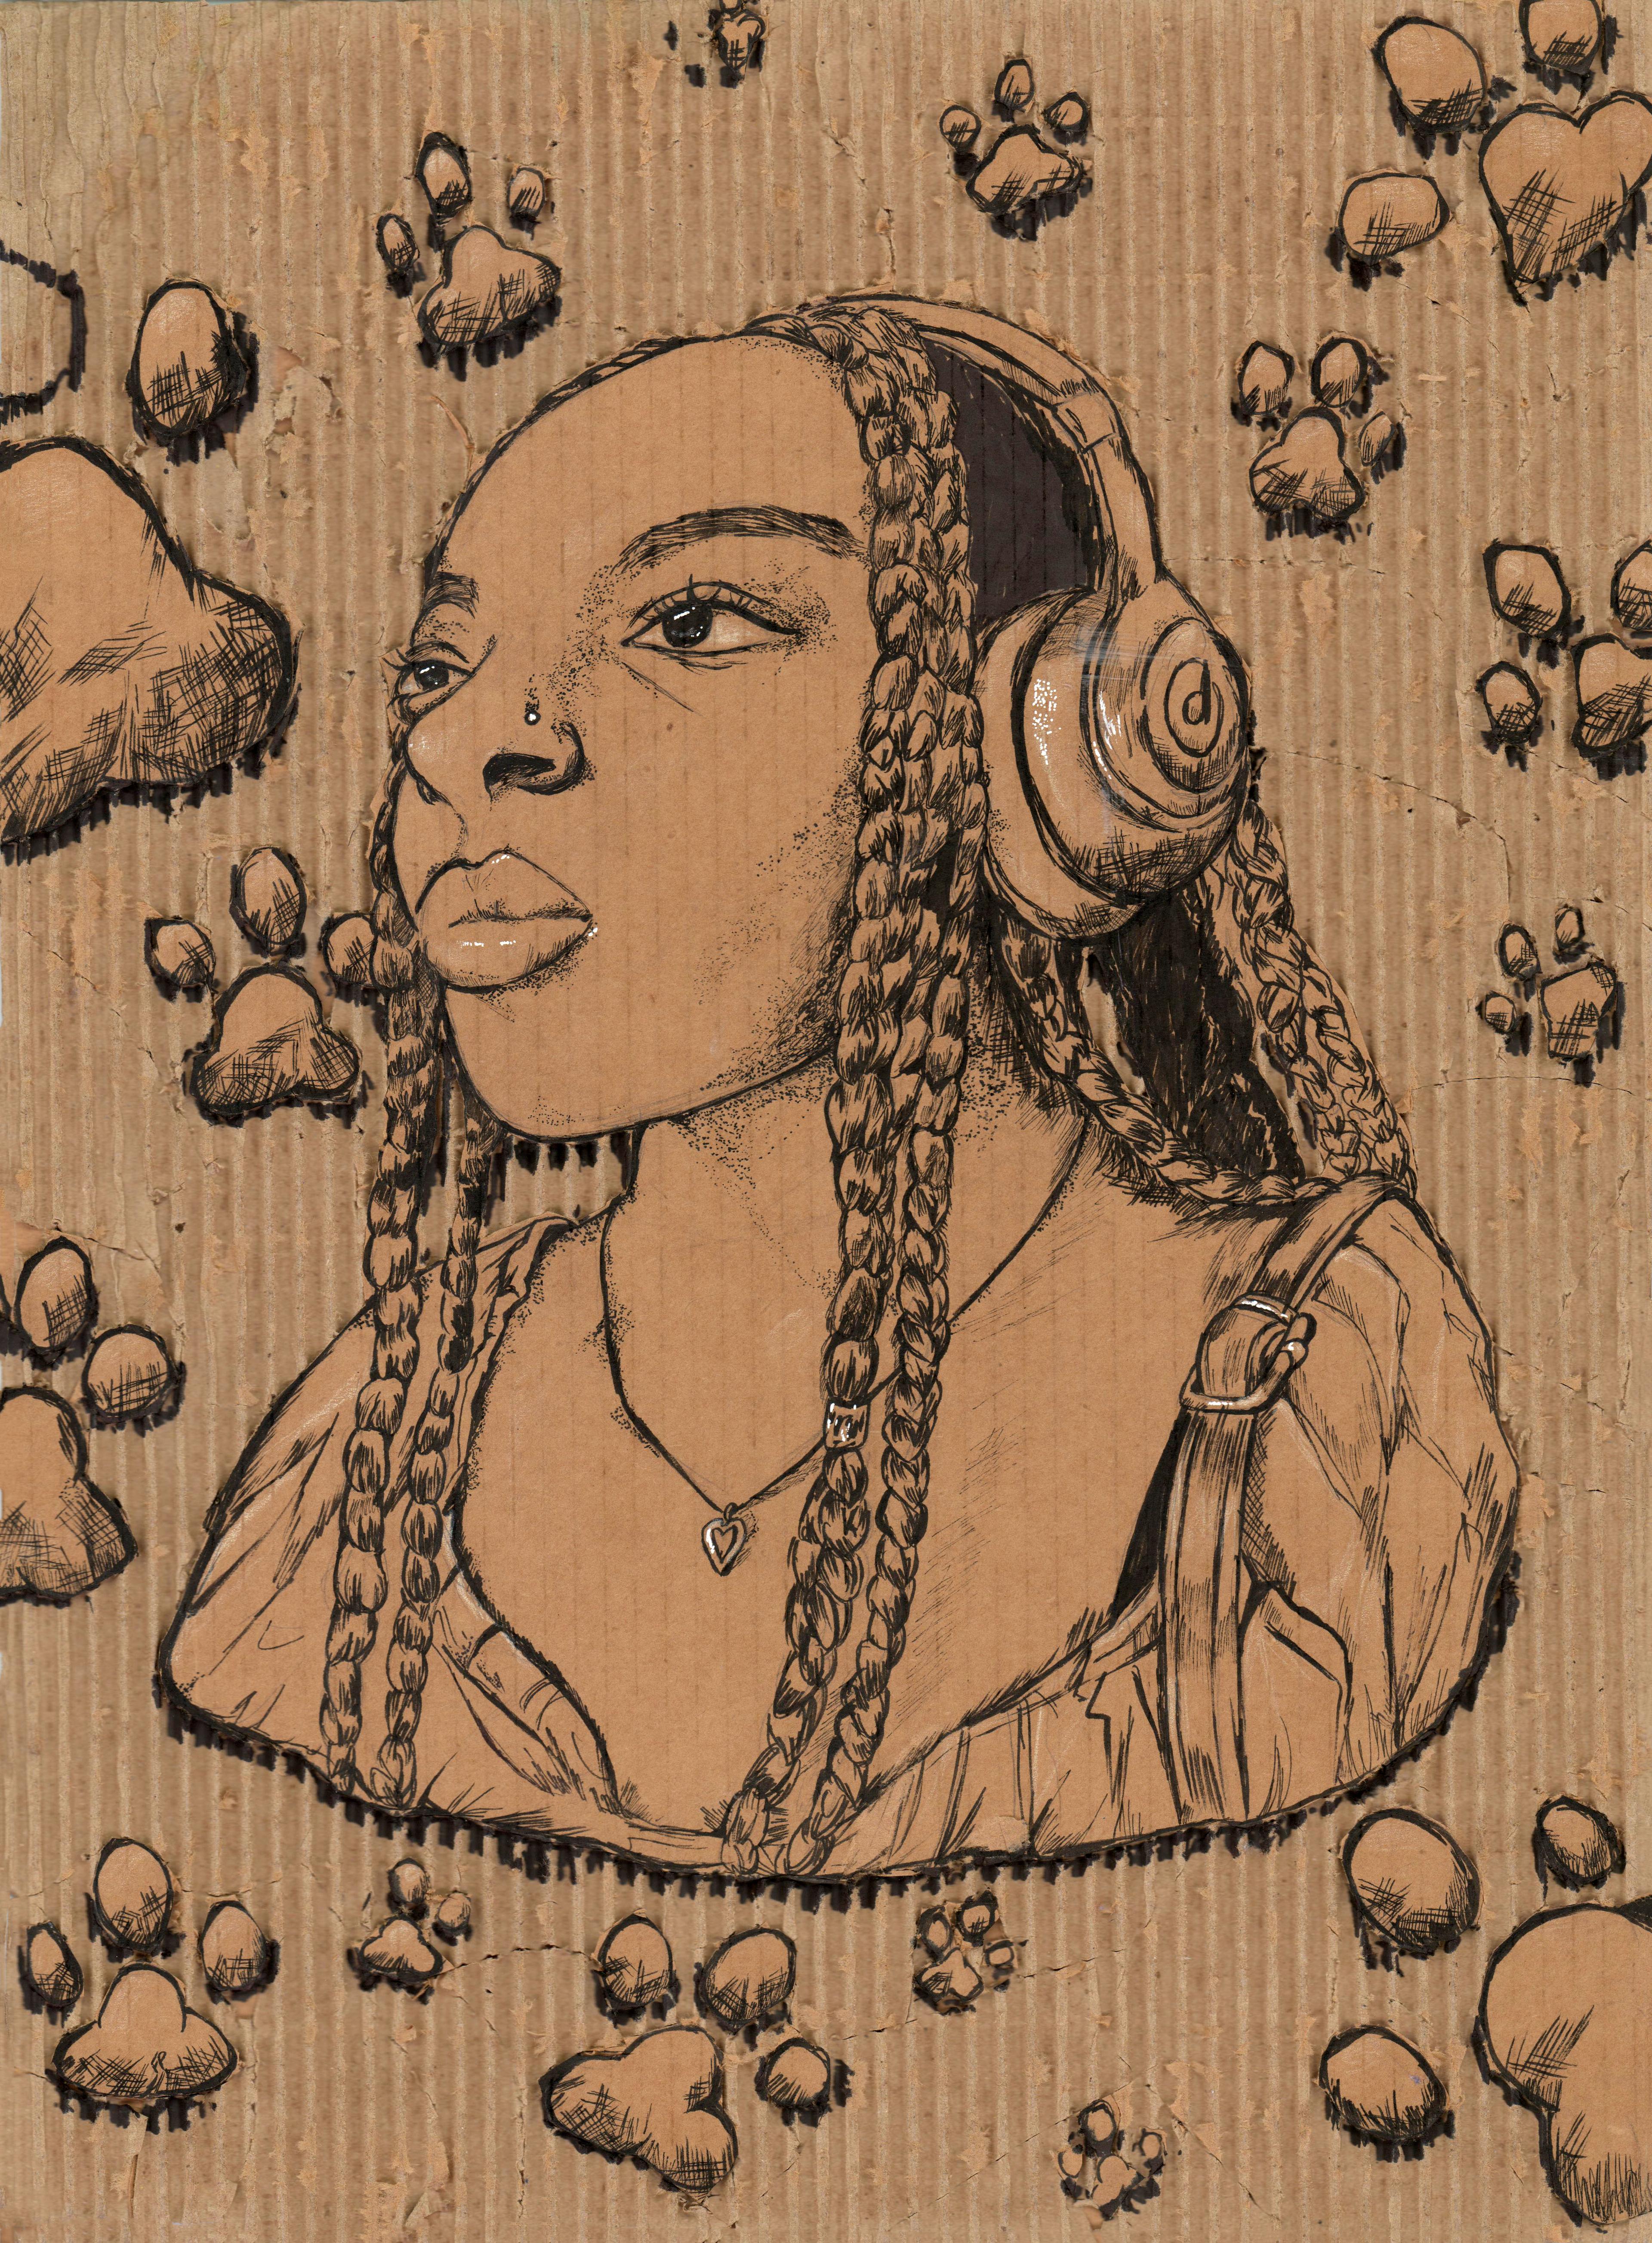 Image on light brown corrugated cardboard of a head-and-shoulders portrait of an adolescent girl created with Sharpie, Micron pen, and gel pen. She faces slightly to the left and has long braids that extend down to her chest. She wears a large set of headphones, a blouse, a small necklace with a heart-shaped pendant, and a strap for a bag that hangs from her left shoulder. The portrait is surrounded by numerous stylized convex imprints of paw prints from a cat.